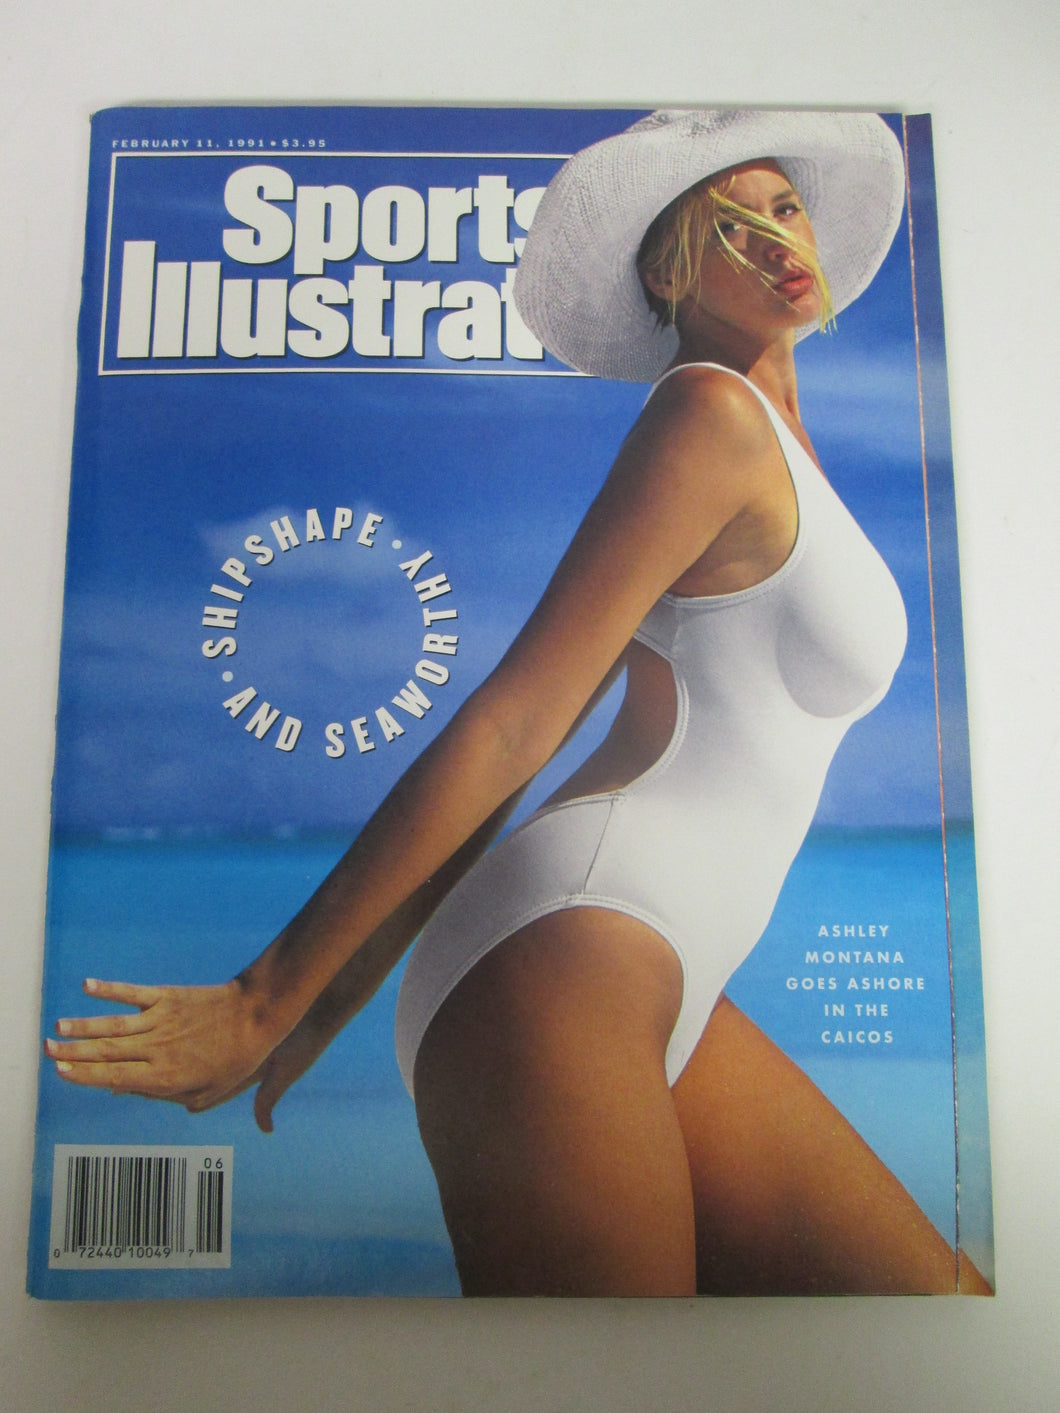 Sports Illustrated Magazine Ashley Montana Goes Ashore in the Calicos Cover Feb 11 1991